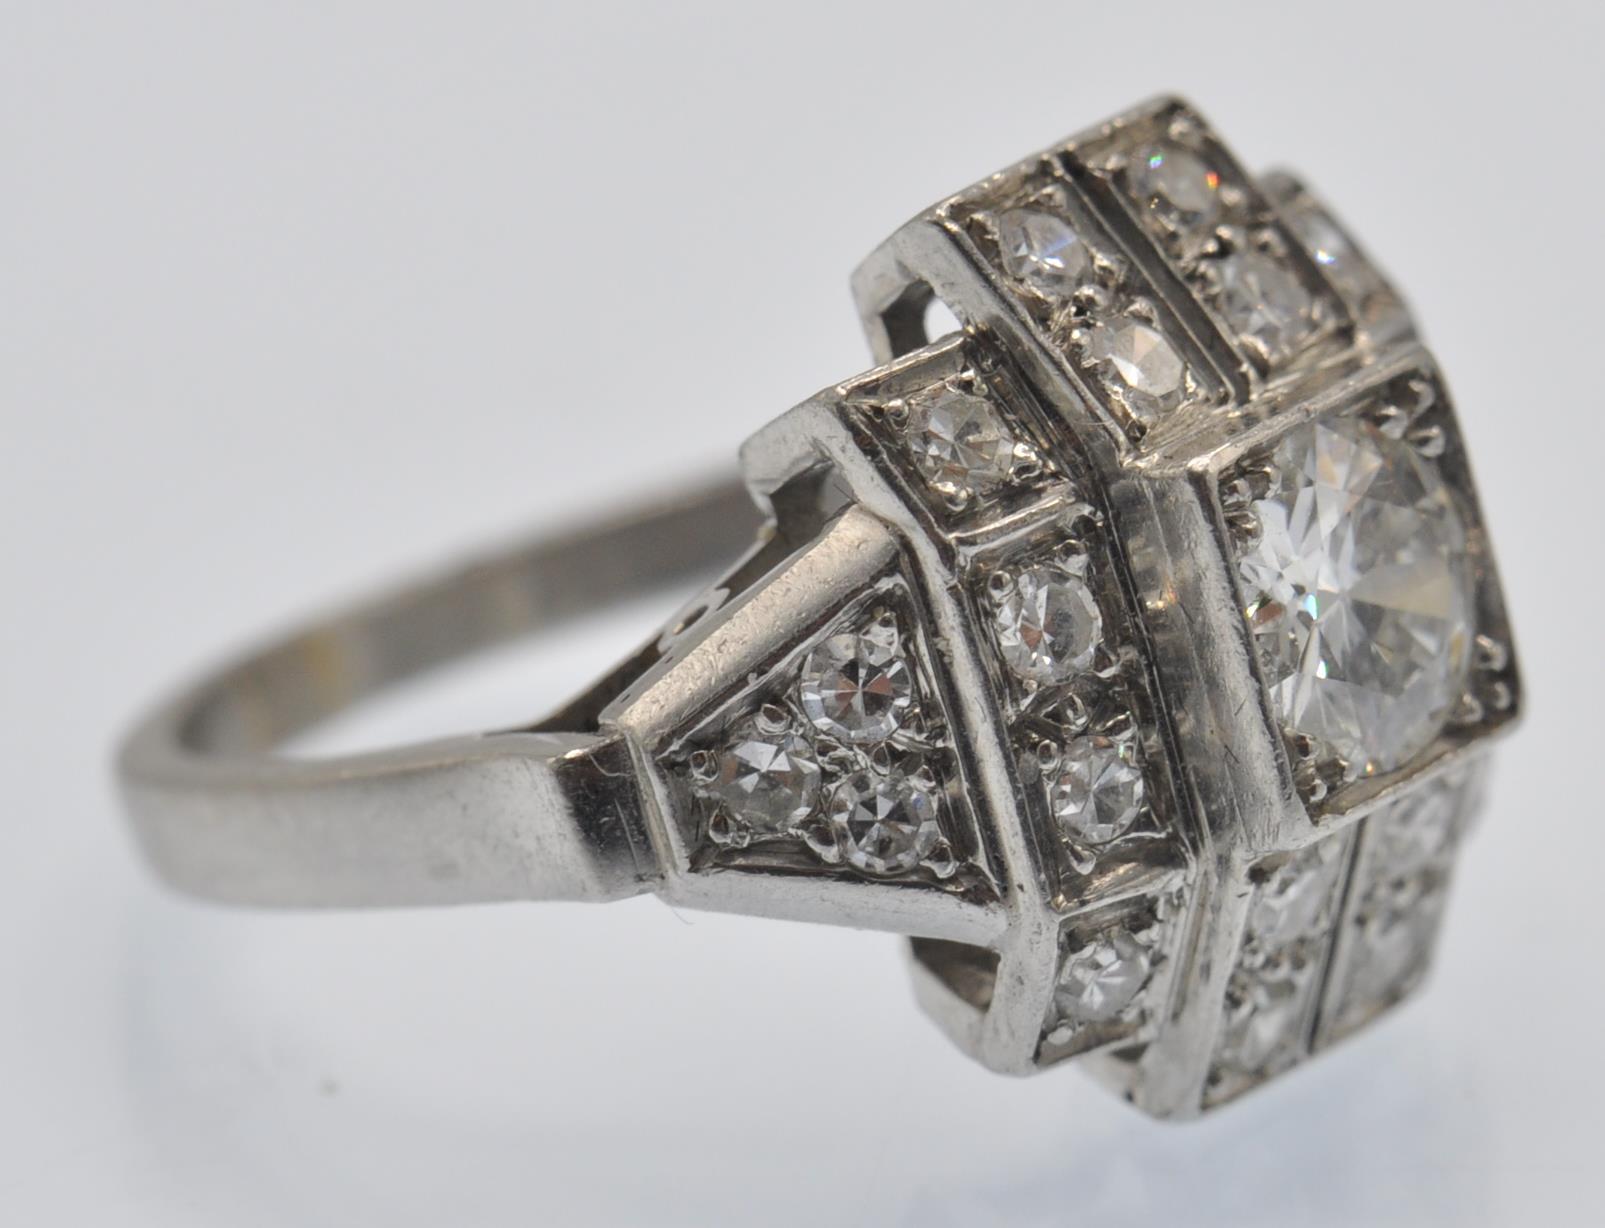 A French 1930s Art Deco Platinum & Diamond Geometric Cluster Ring - Image 2 of 4